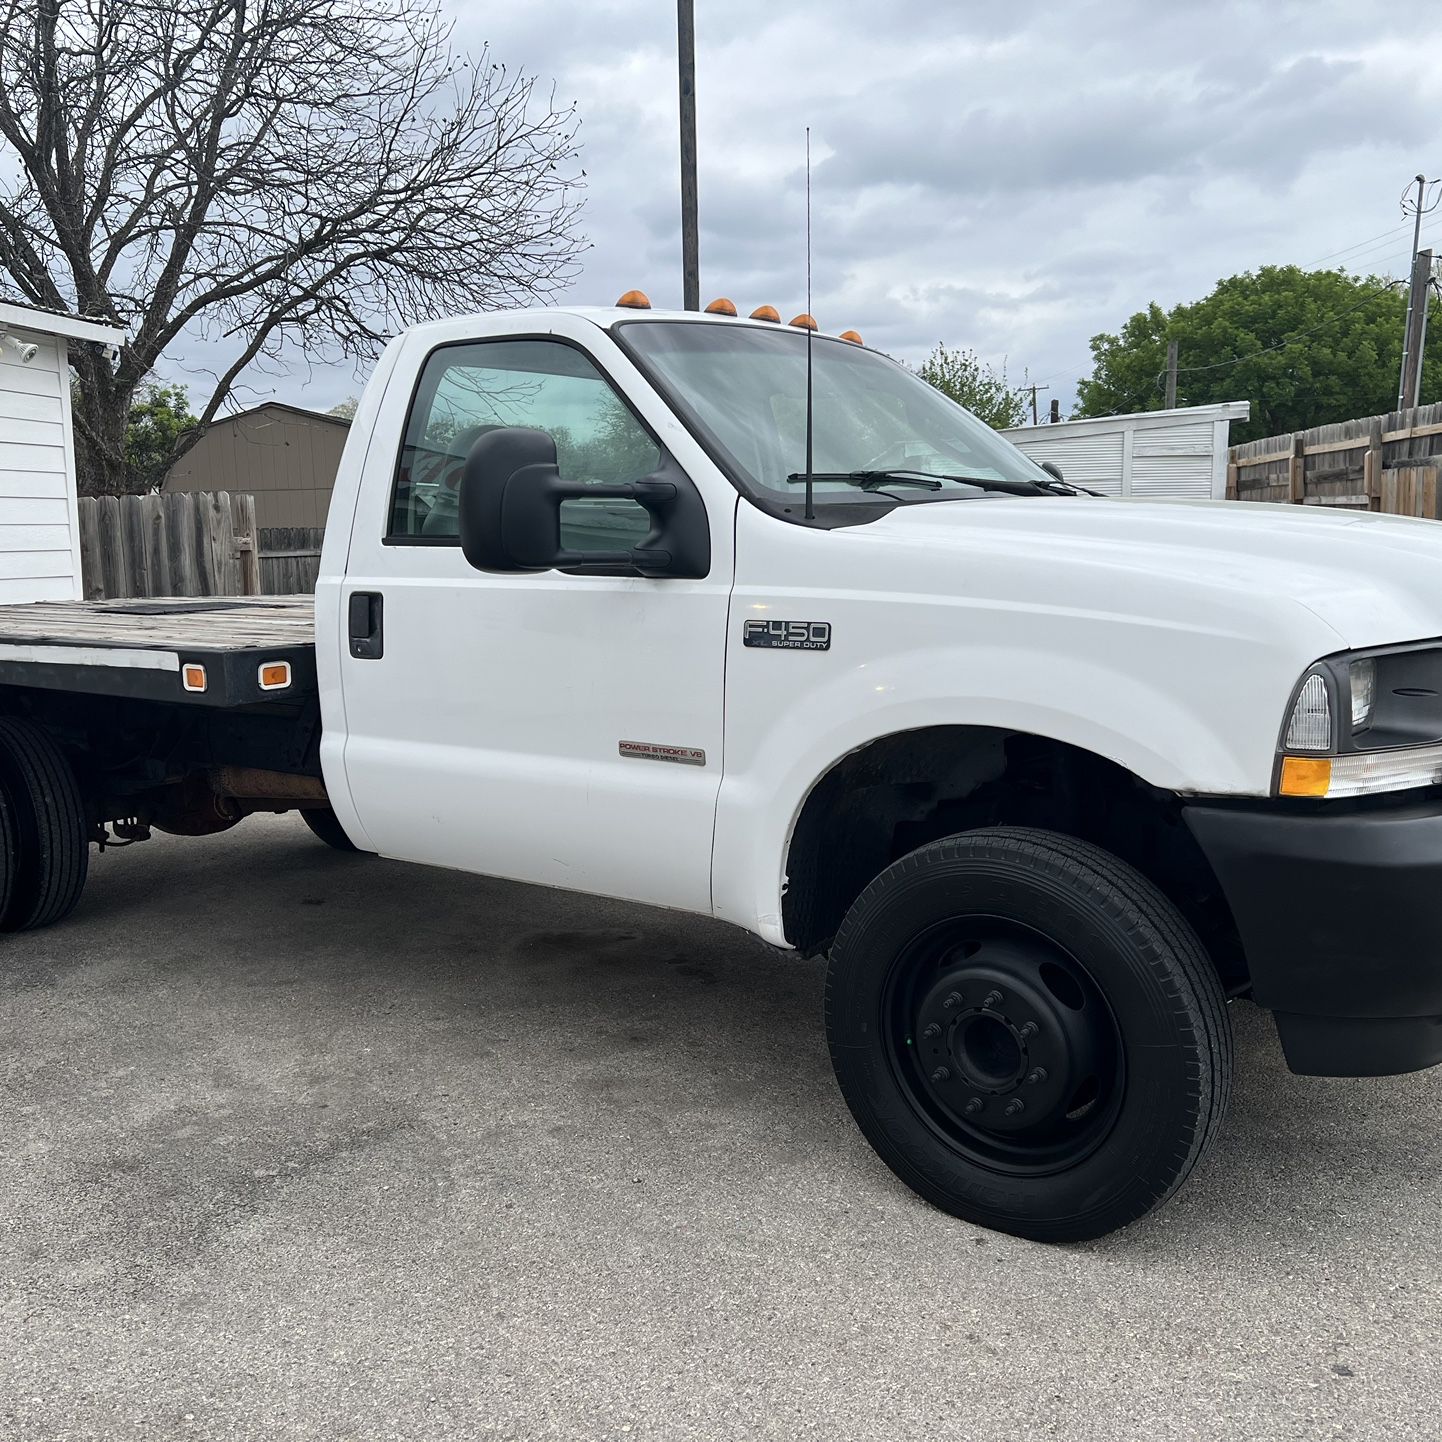 2003 Ford F-450